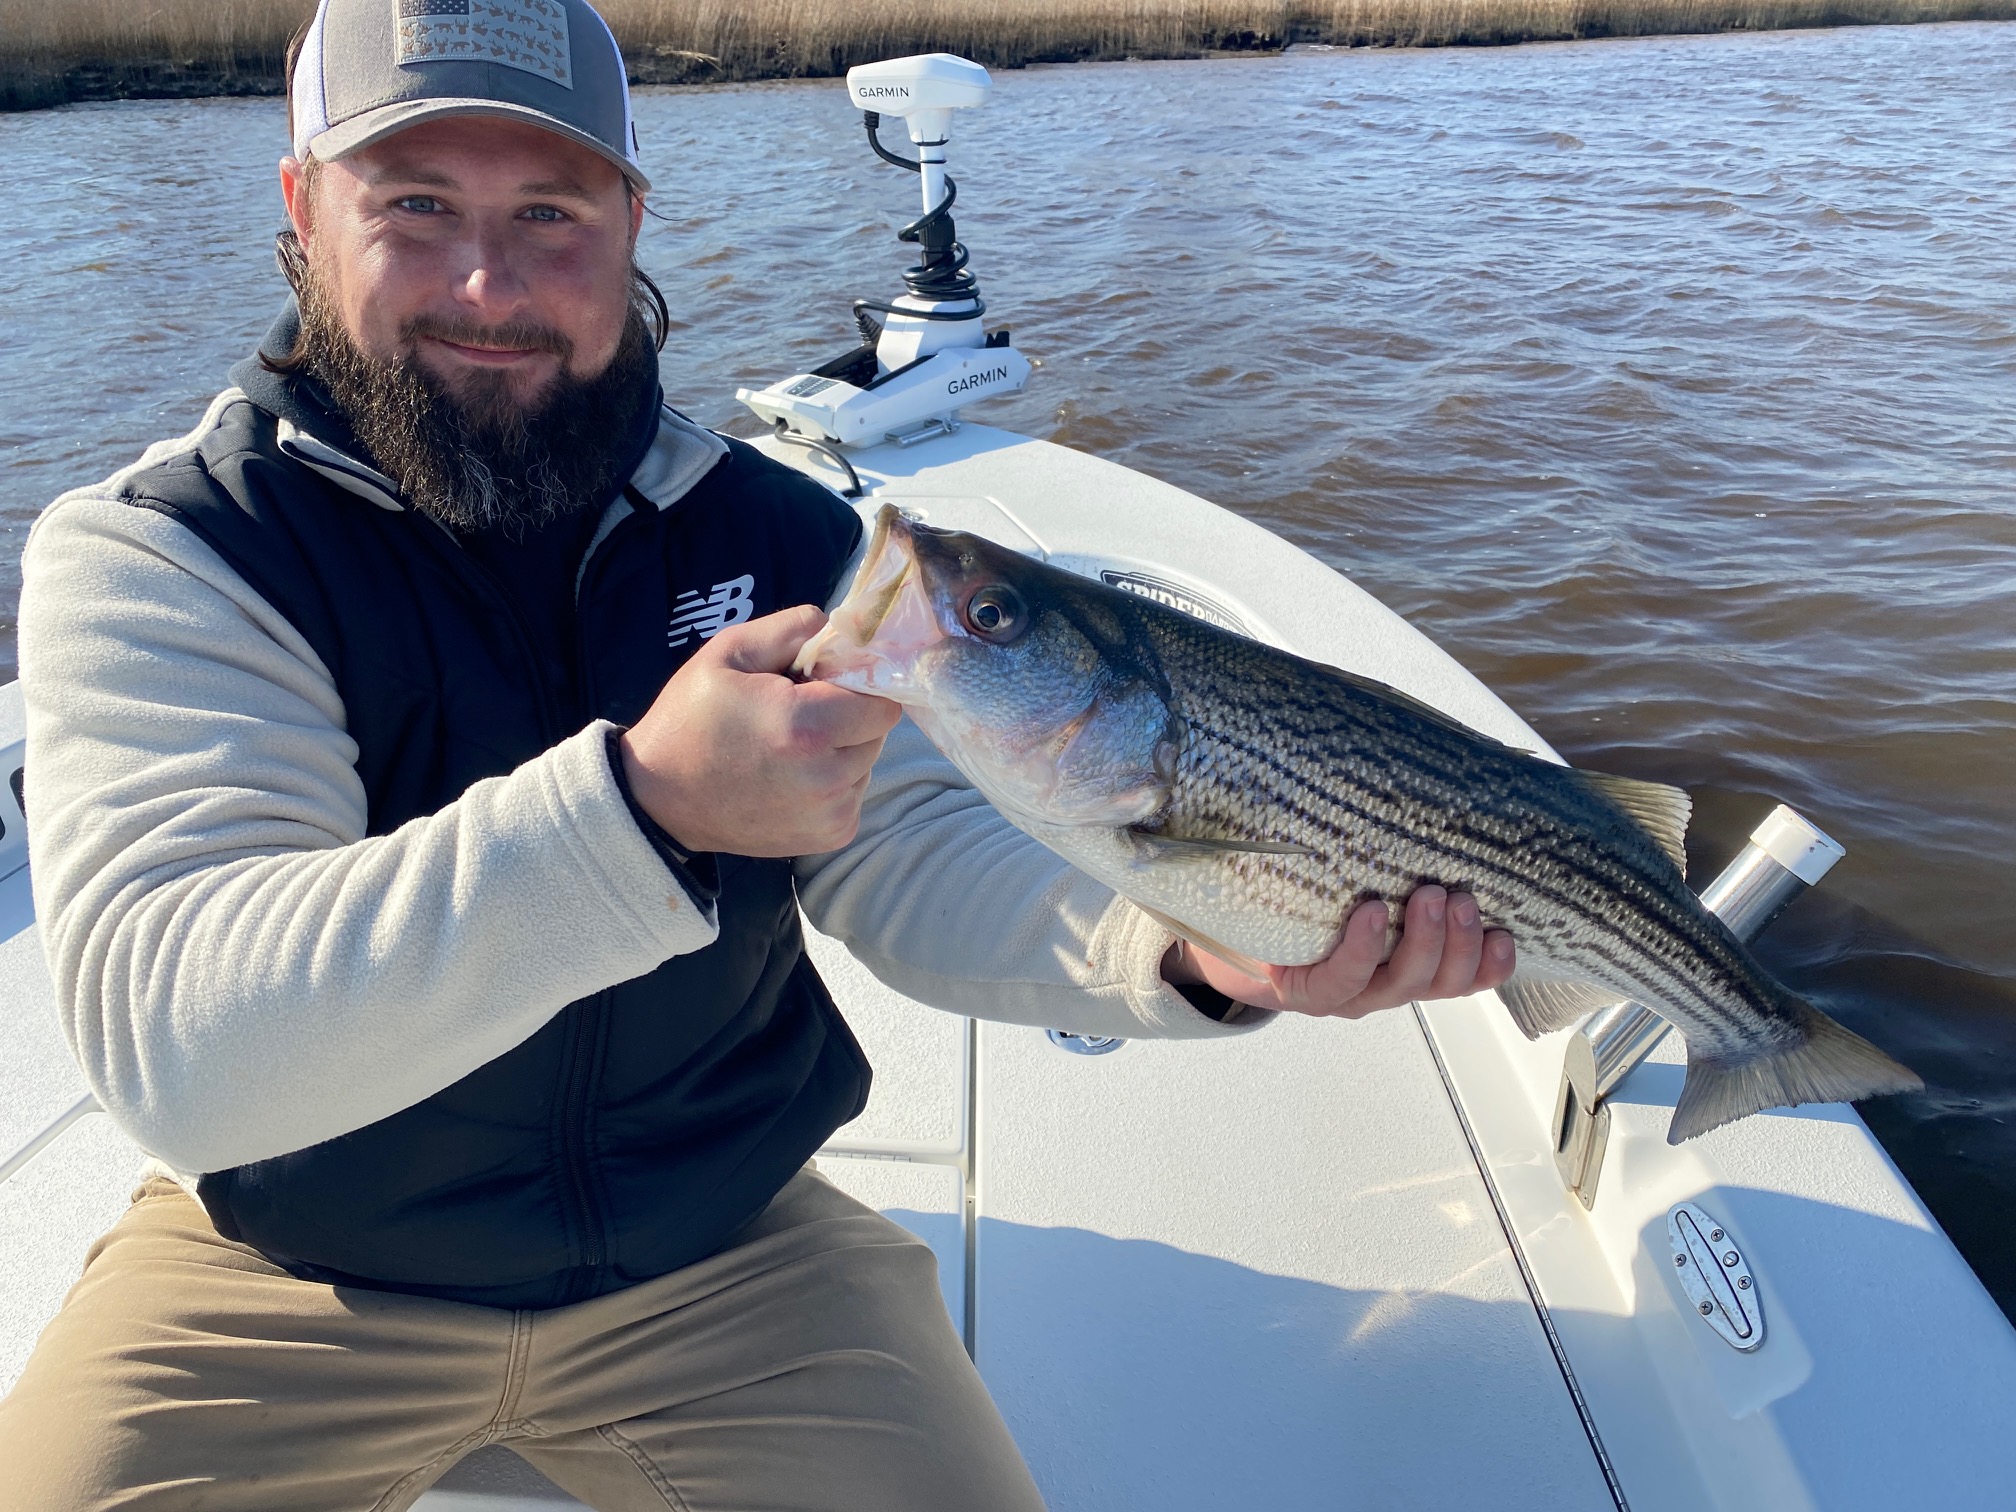 PENN Battle II Spinning Reel Review - Wrightsville Beach Fishing Report  with Capt. Jot Owens